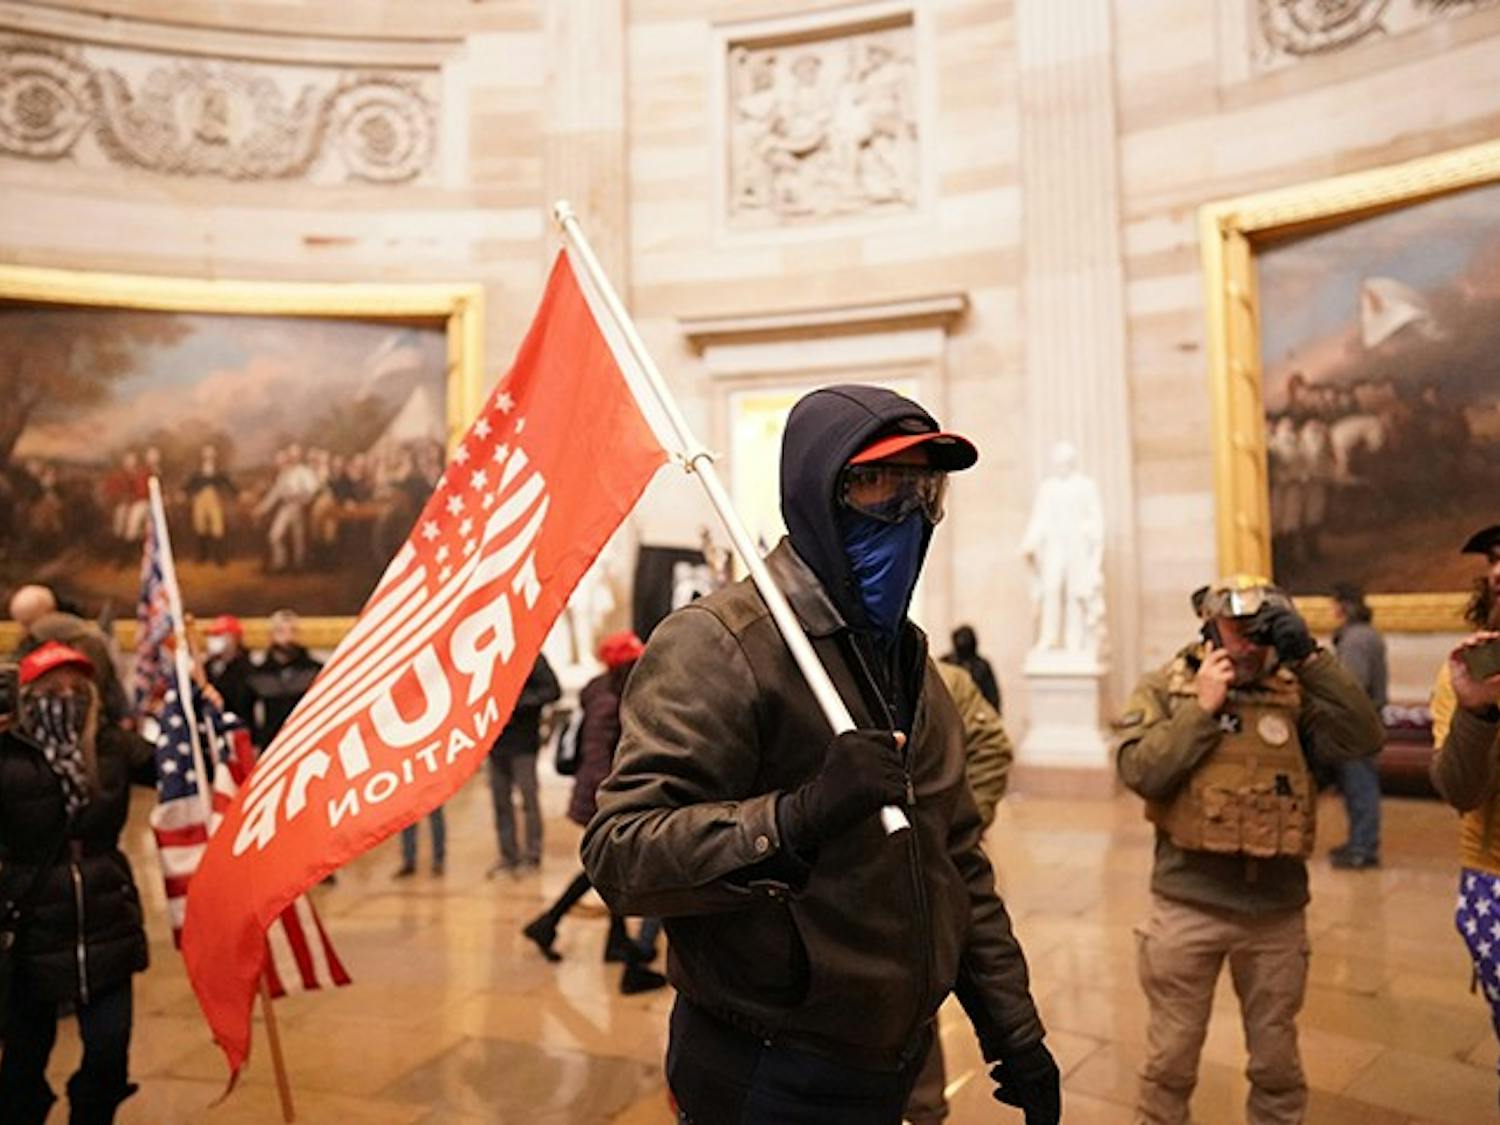 Protesters storm the Capitol and halt a joint session of the 117th Congress on Wednesday, Jan. 6, 2021, in Washington, D.C. (Kent Nishimura/Los Angeles Times/TNS)